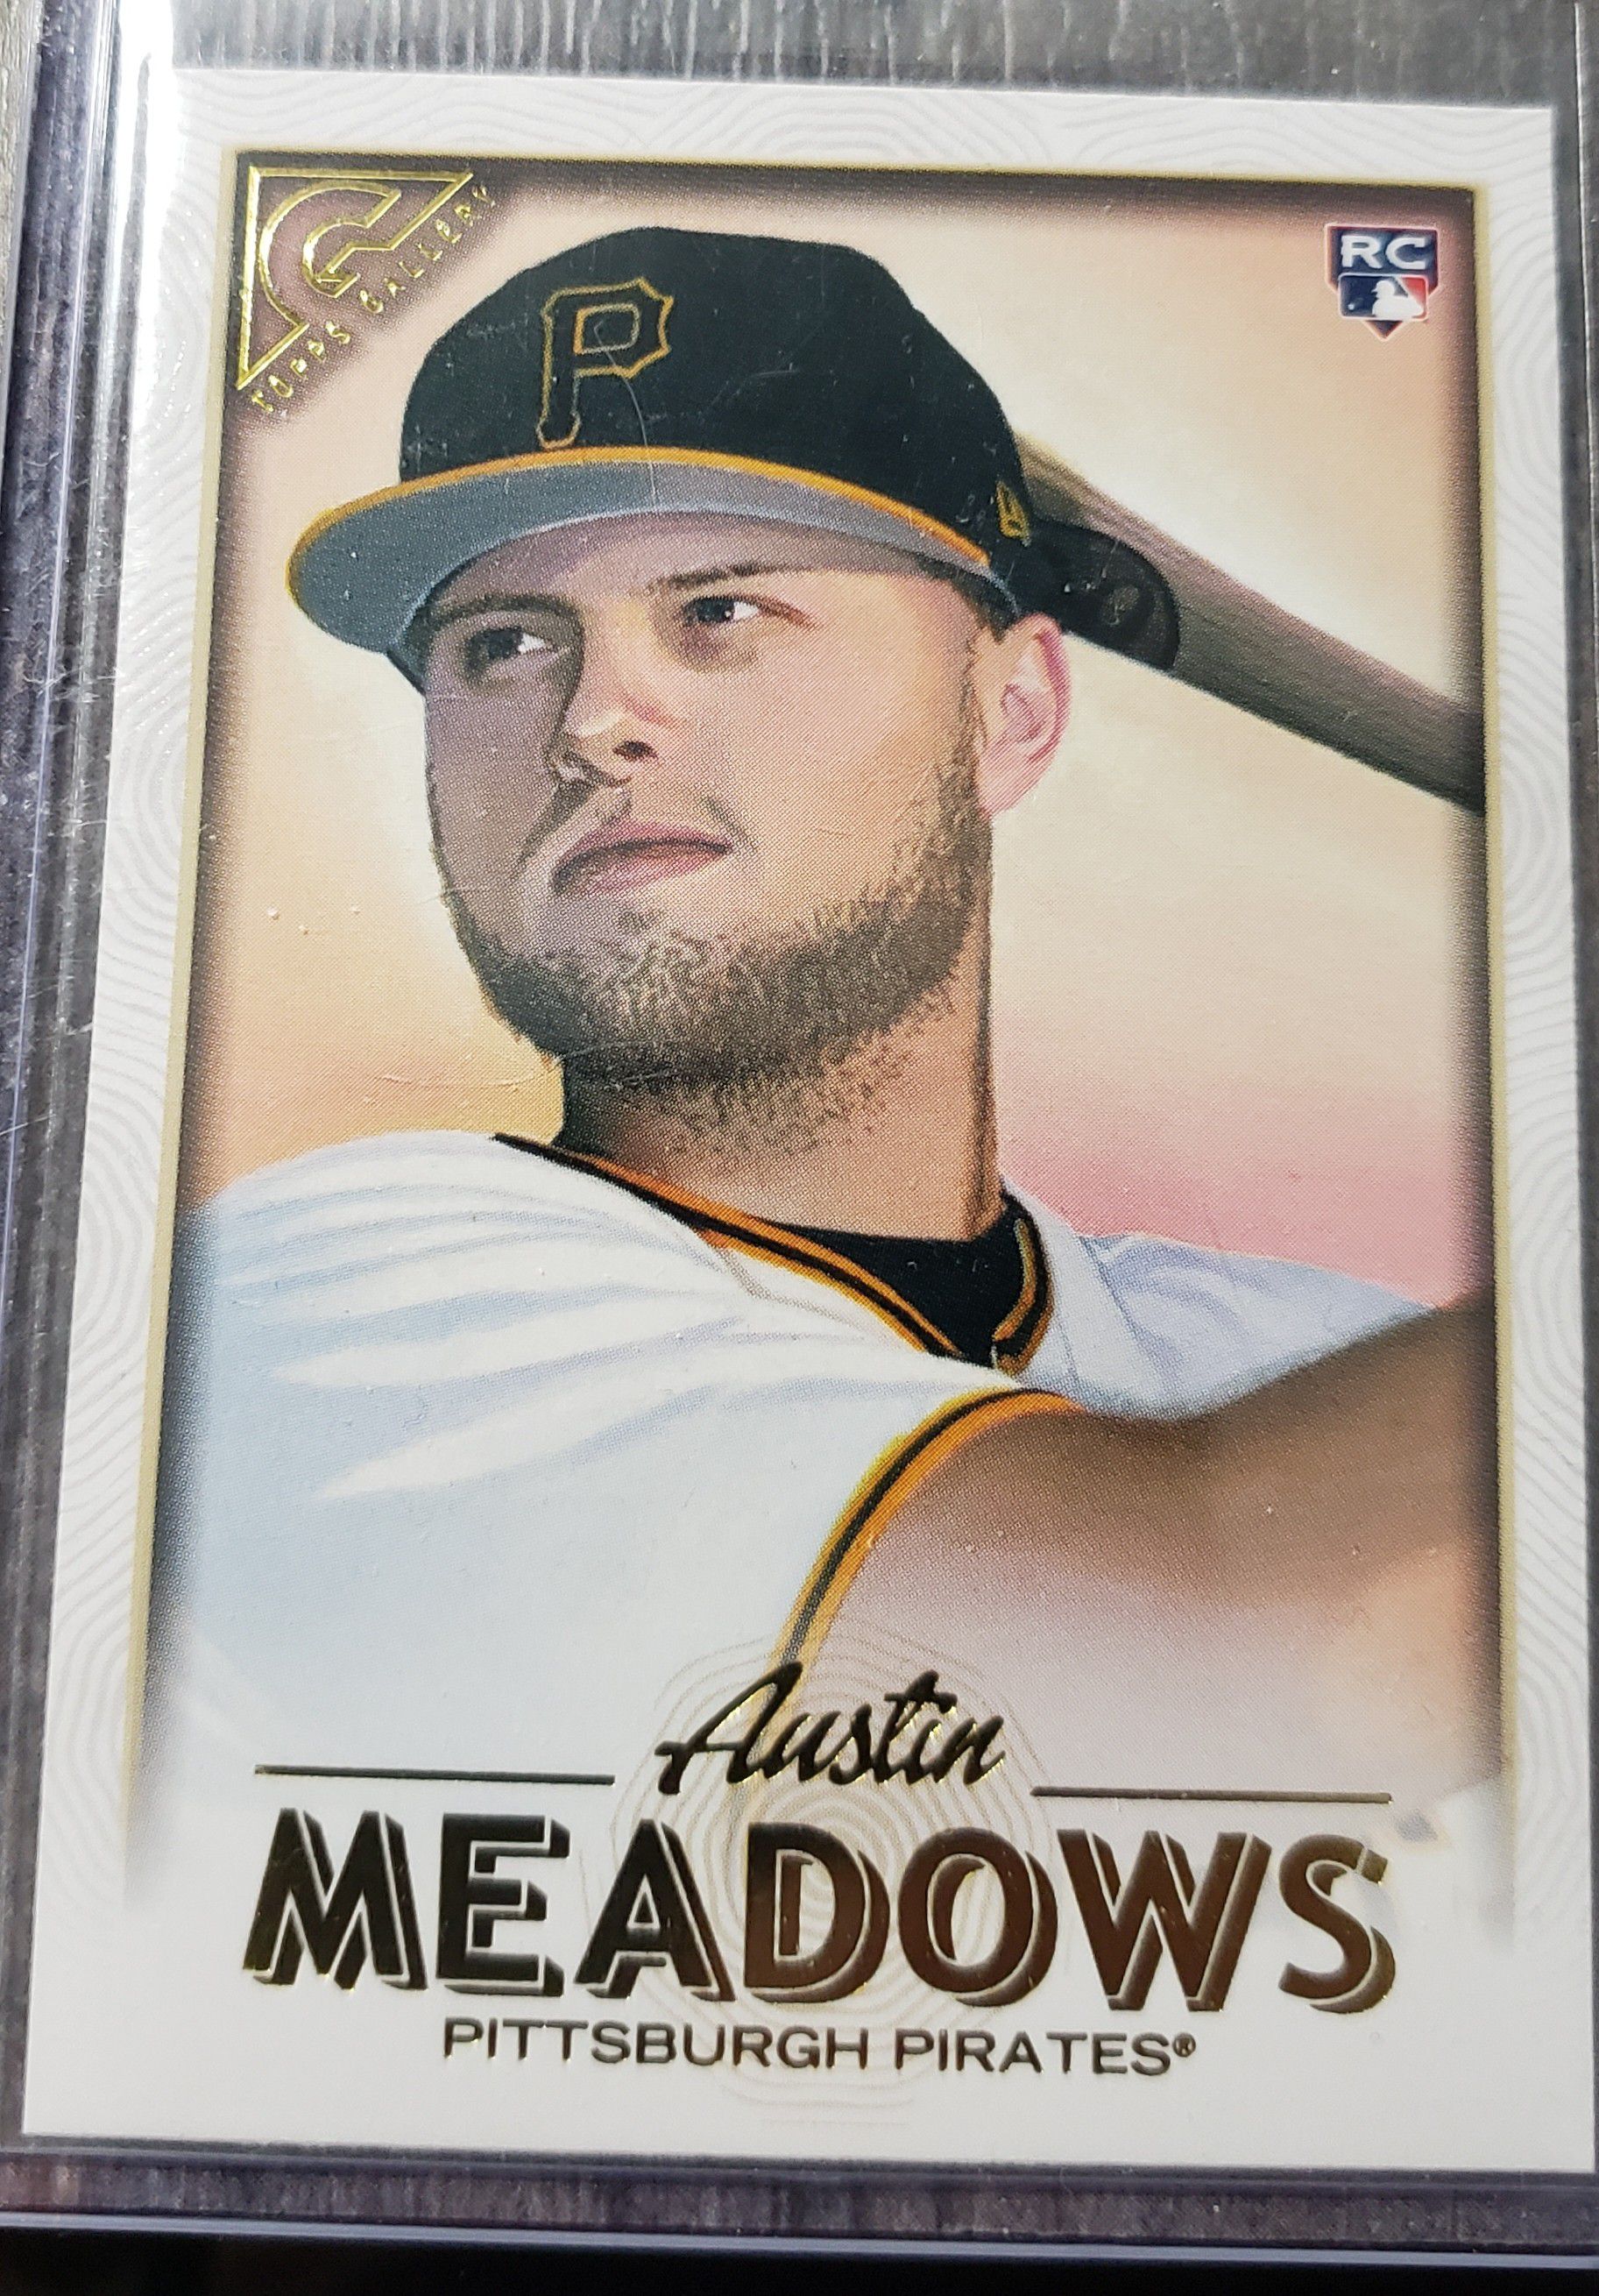 Austin Meadows rookie card topps gallery